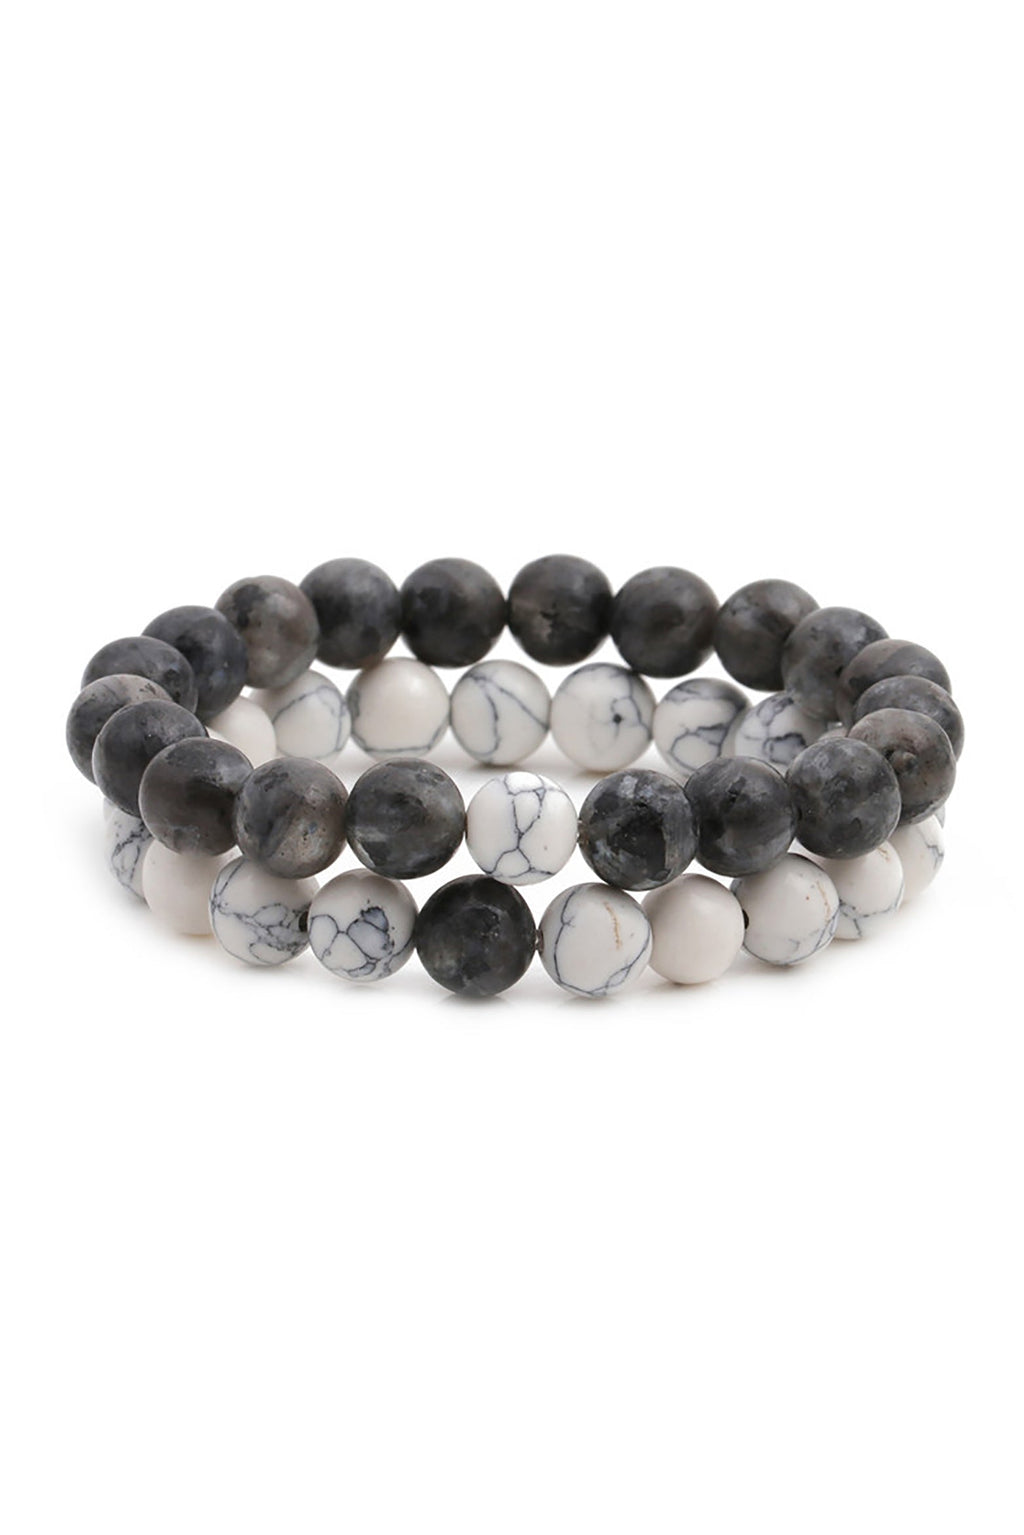 William Grey and White Agate Bracelet Set: Elevate Your Wrist Game with This Stunning Combination of Grey and White Agate Stones.